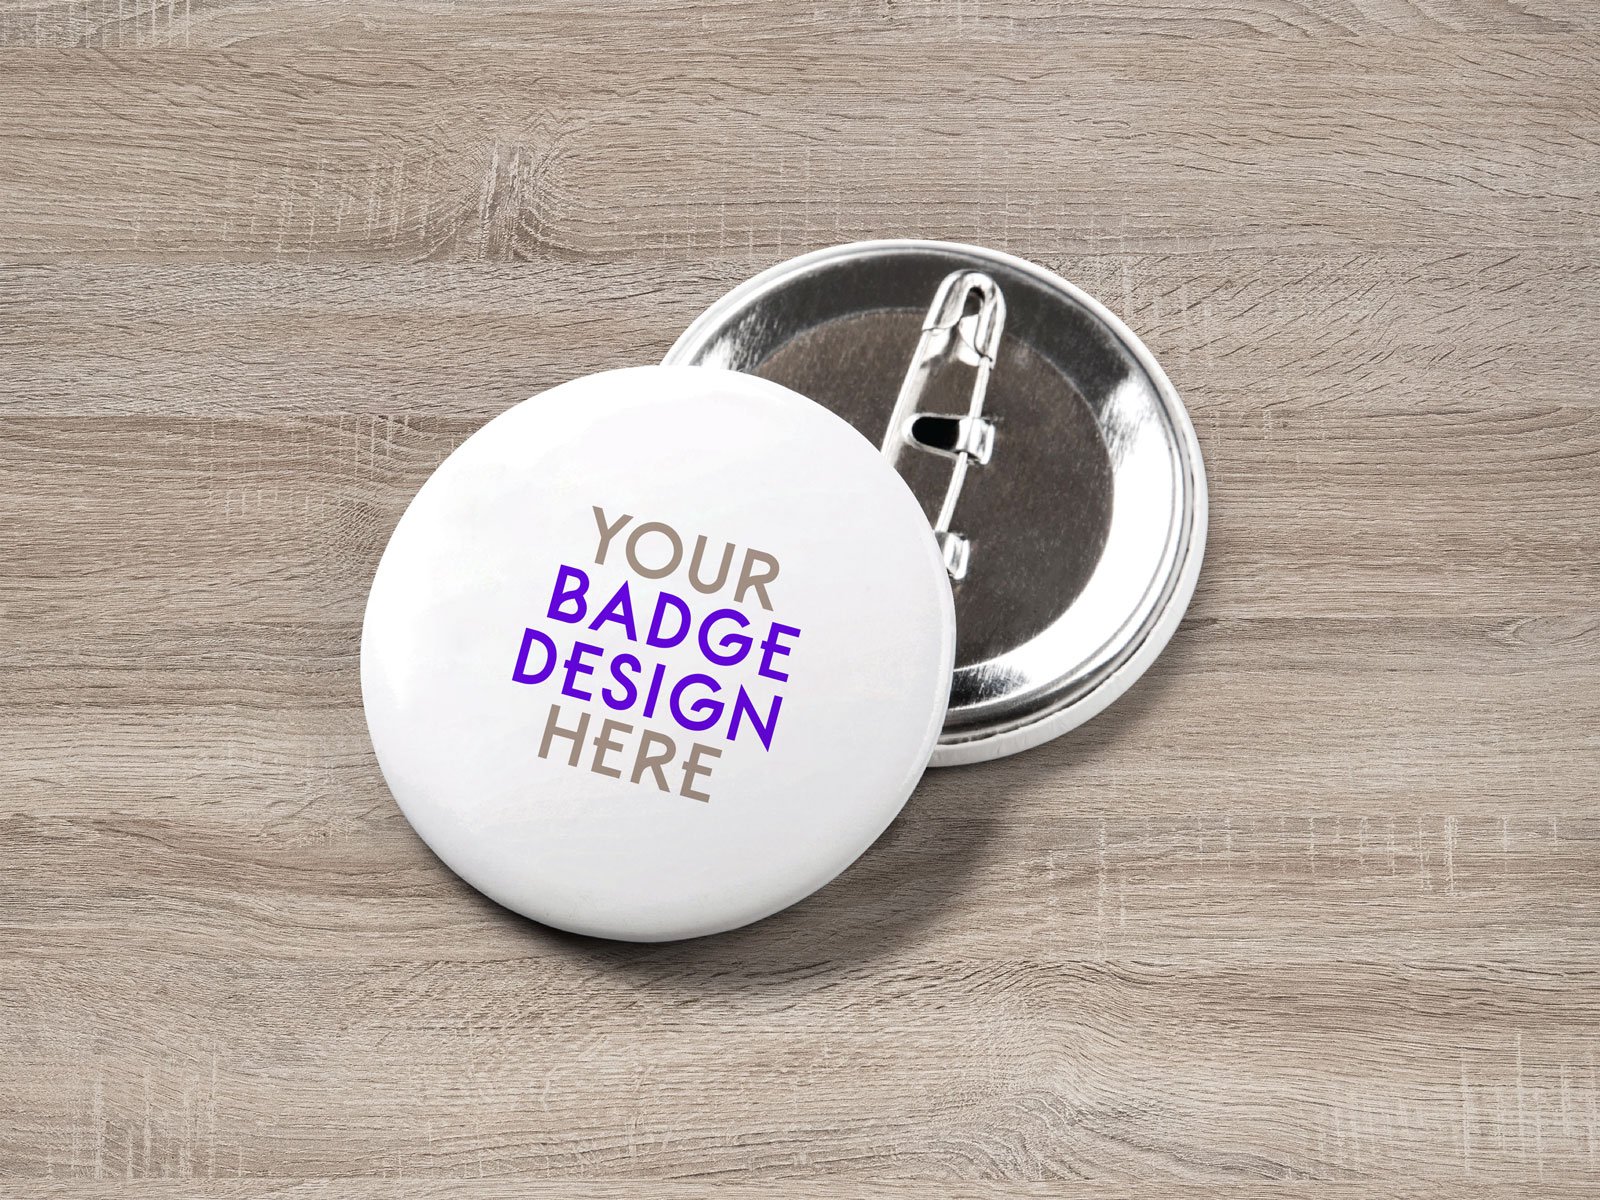 Download Free Realistic Pin Button Badge Mockup PSD | Designbolts